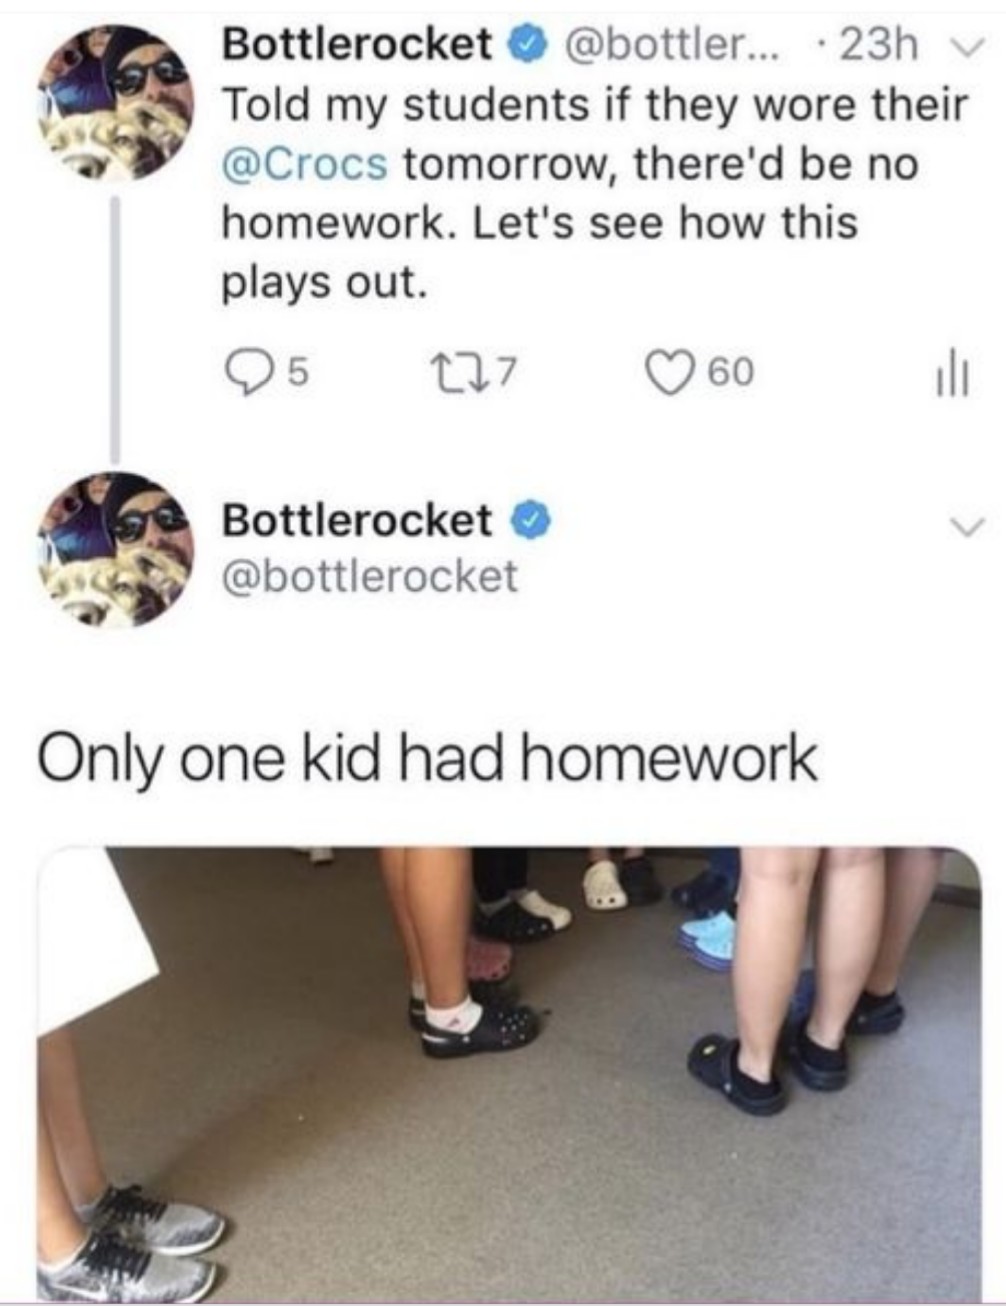 shoulder - Bottlerocket ... 23h v Told my students if they wore their tomorrow, there'd be no homework. Let's see how this plays out. 25 227 60 il Bottlerocket Only one kid had homework